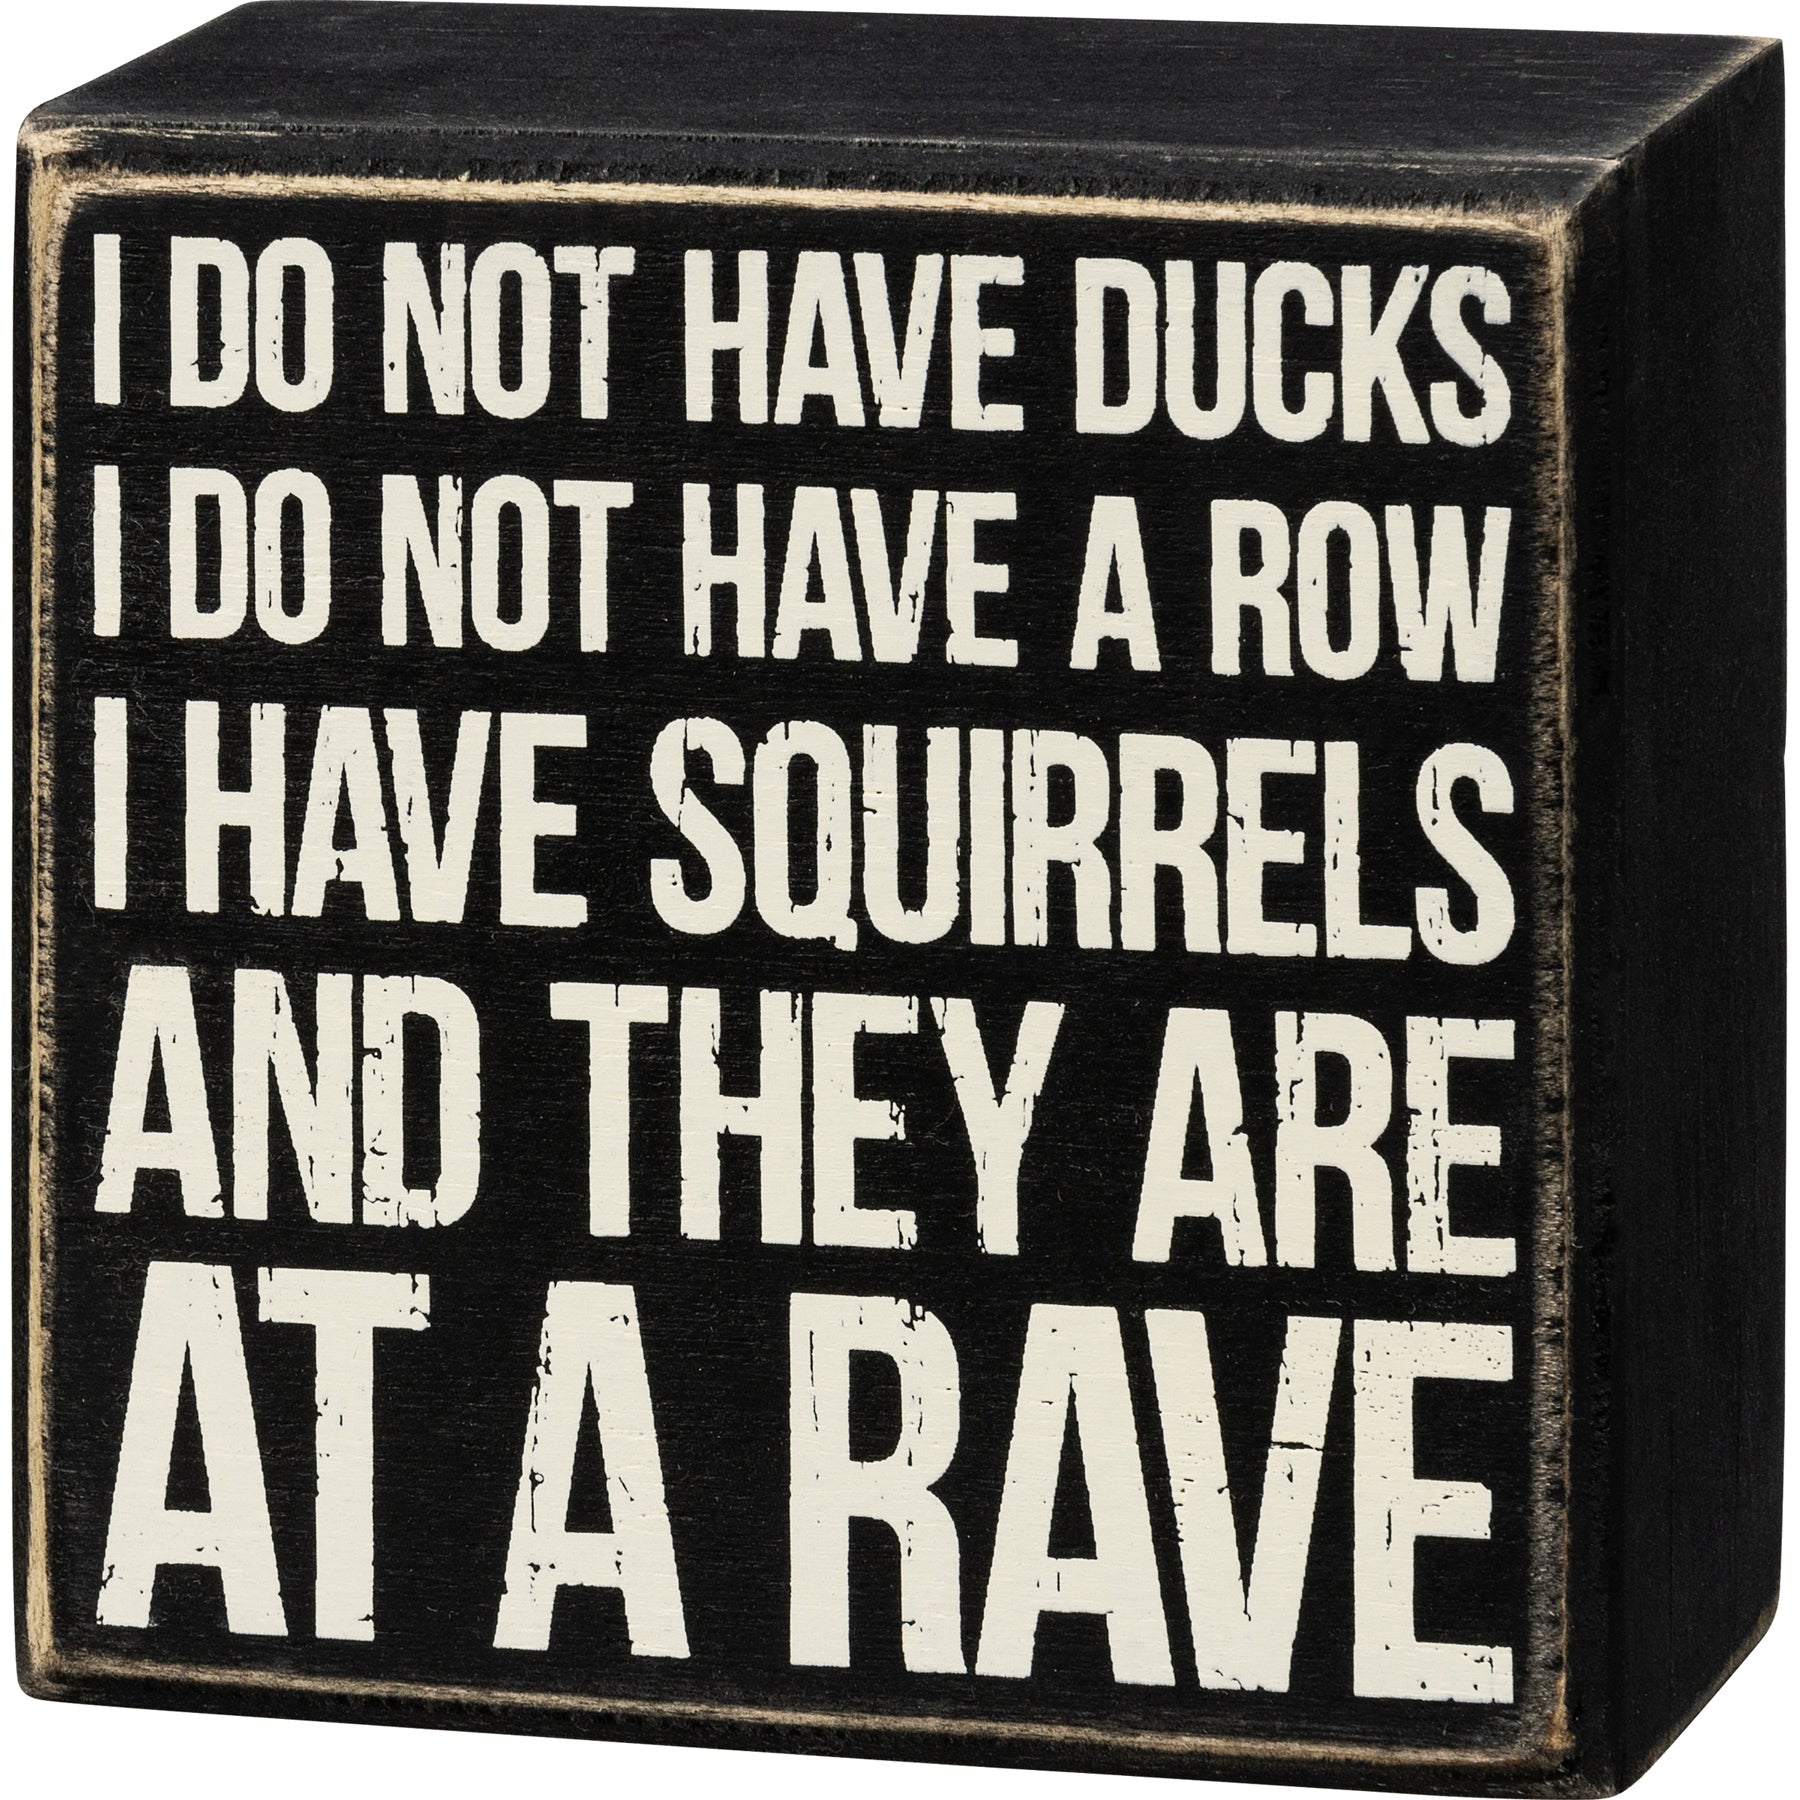 I Have Squirrels And They Are At A Rave Box Sign in Black with White Lettering